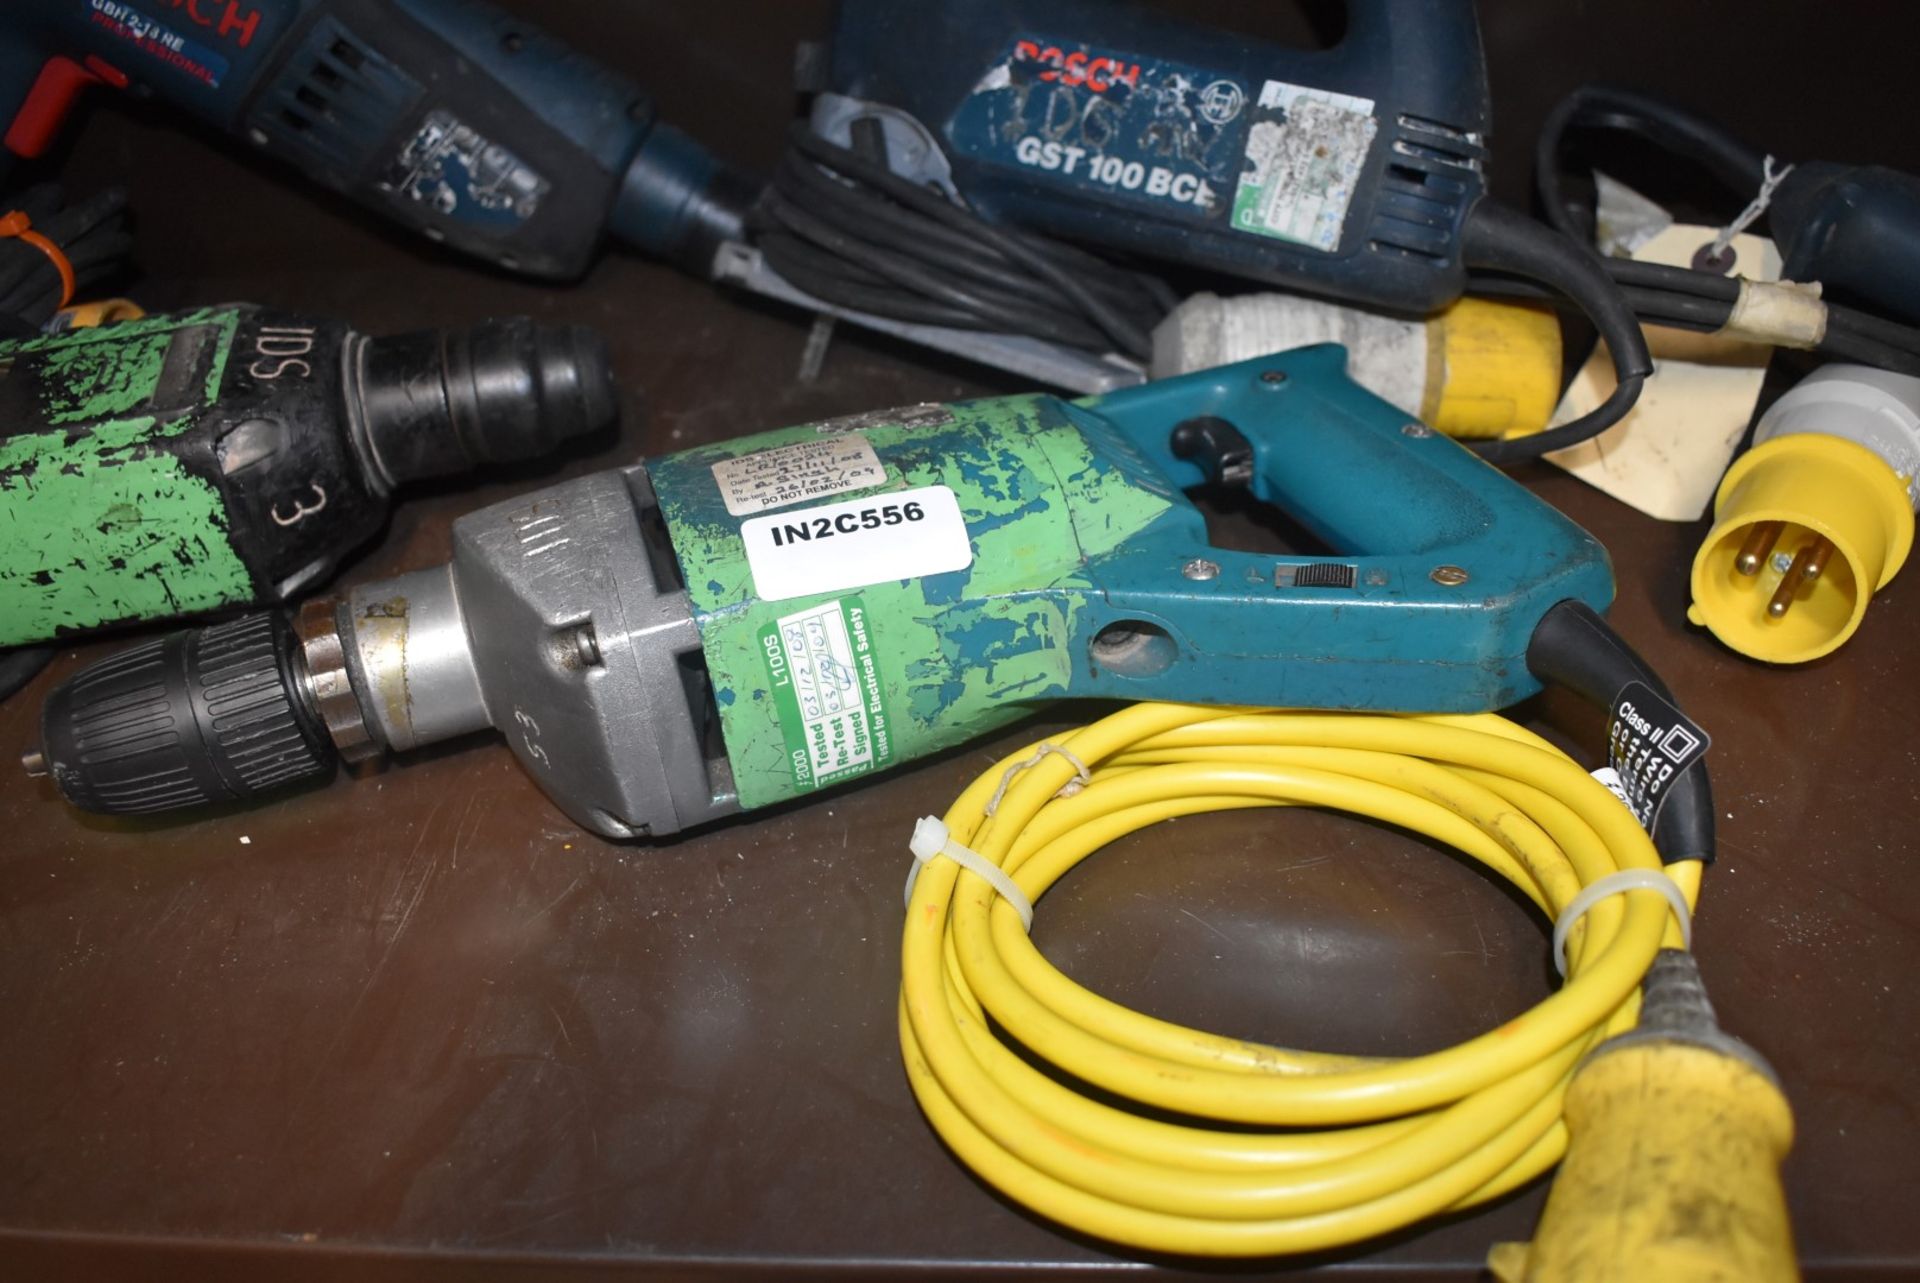 5 x Power Tools Including Saw and Drills - 110v - Image 3 of 8